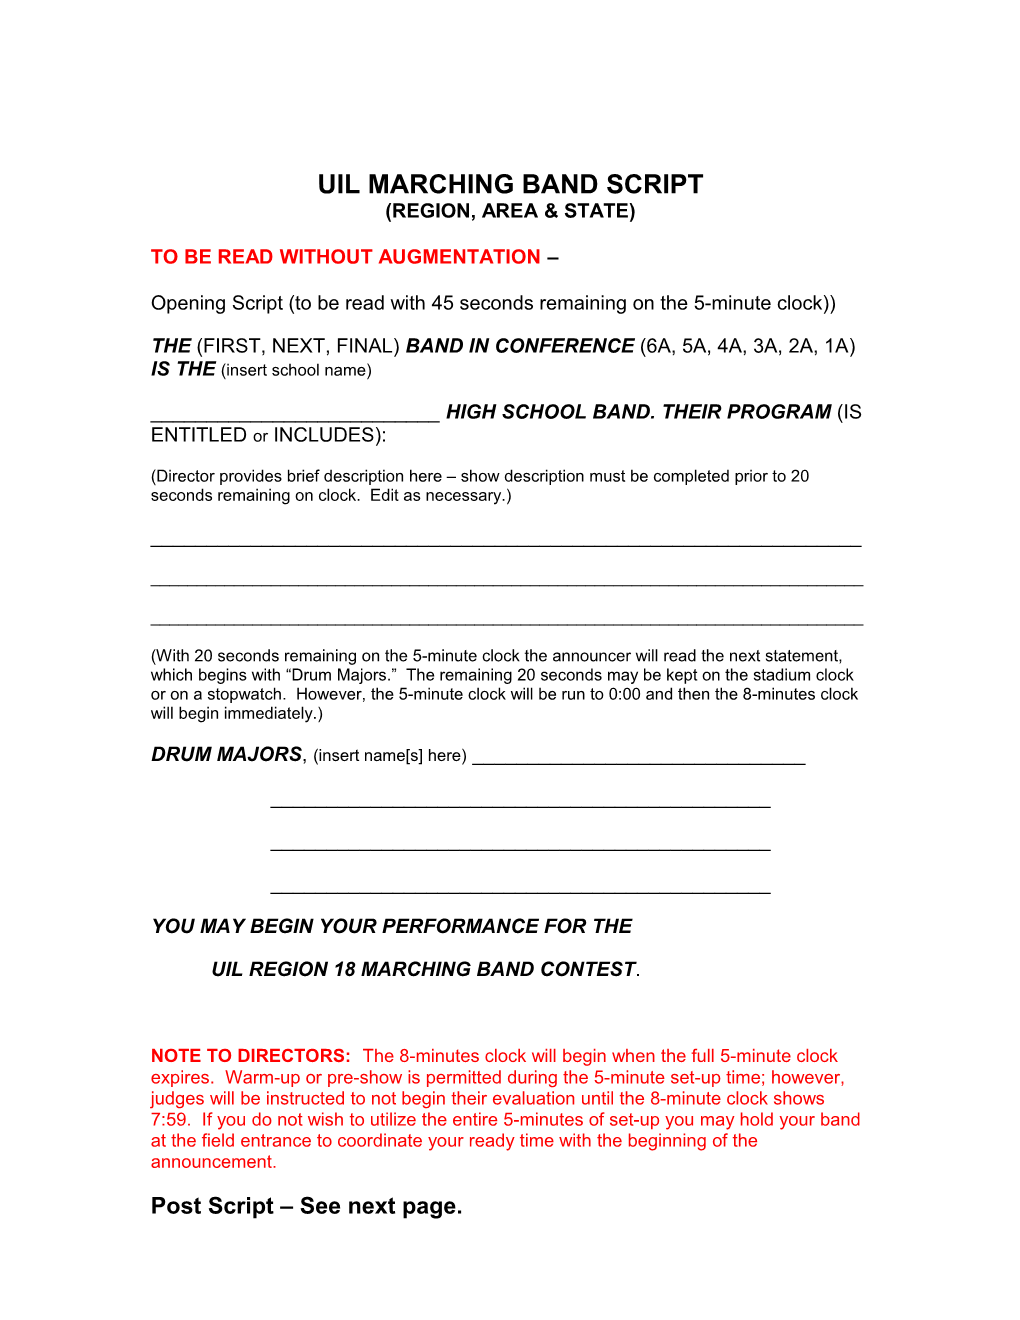 Uil Marching Band Script